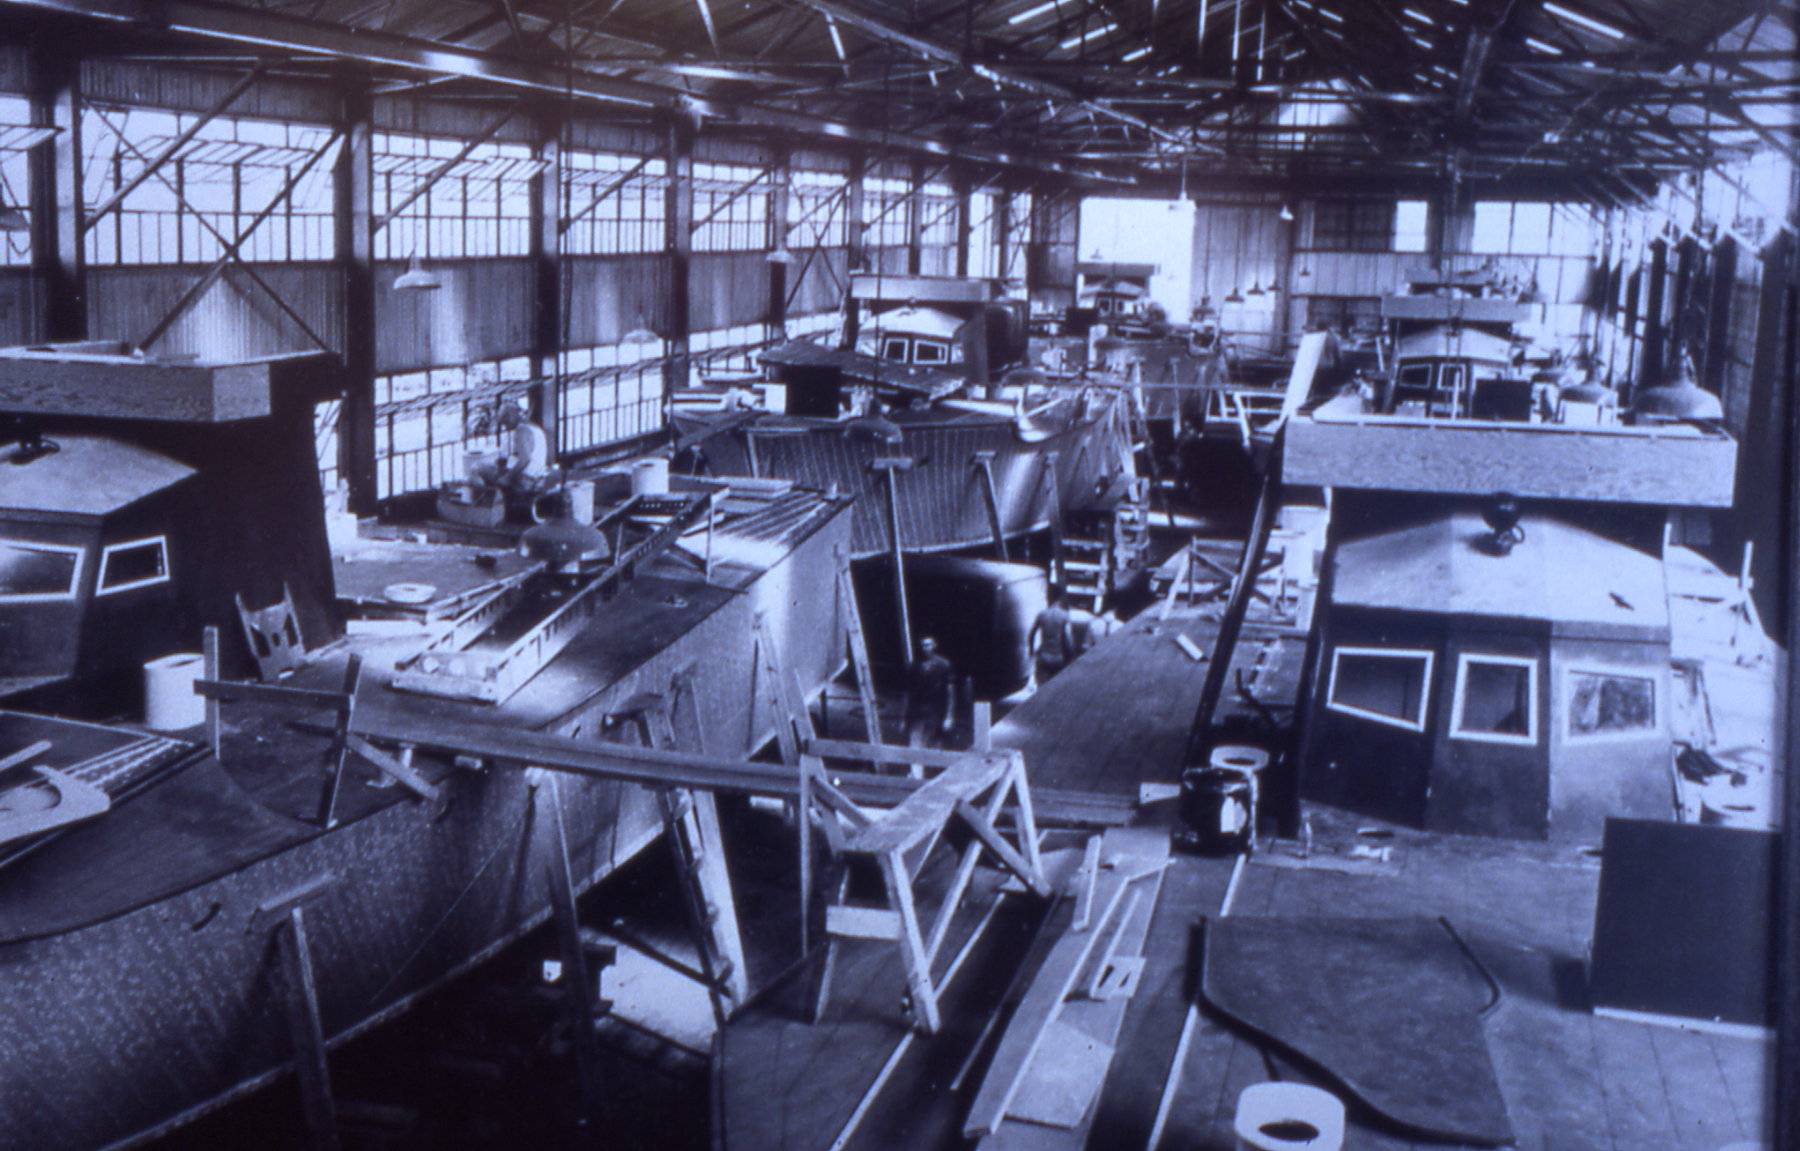 Interior photo of "The Big Shed" circa 1943 as six PT boats are being built for service in World War II at 222 Severn / The Yard.